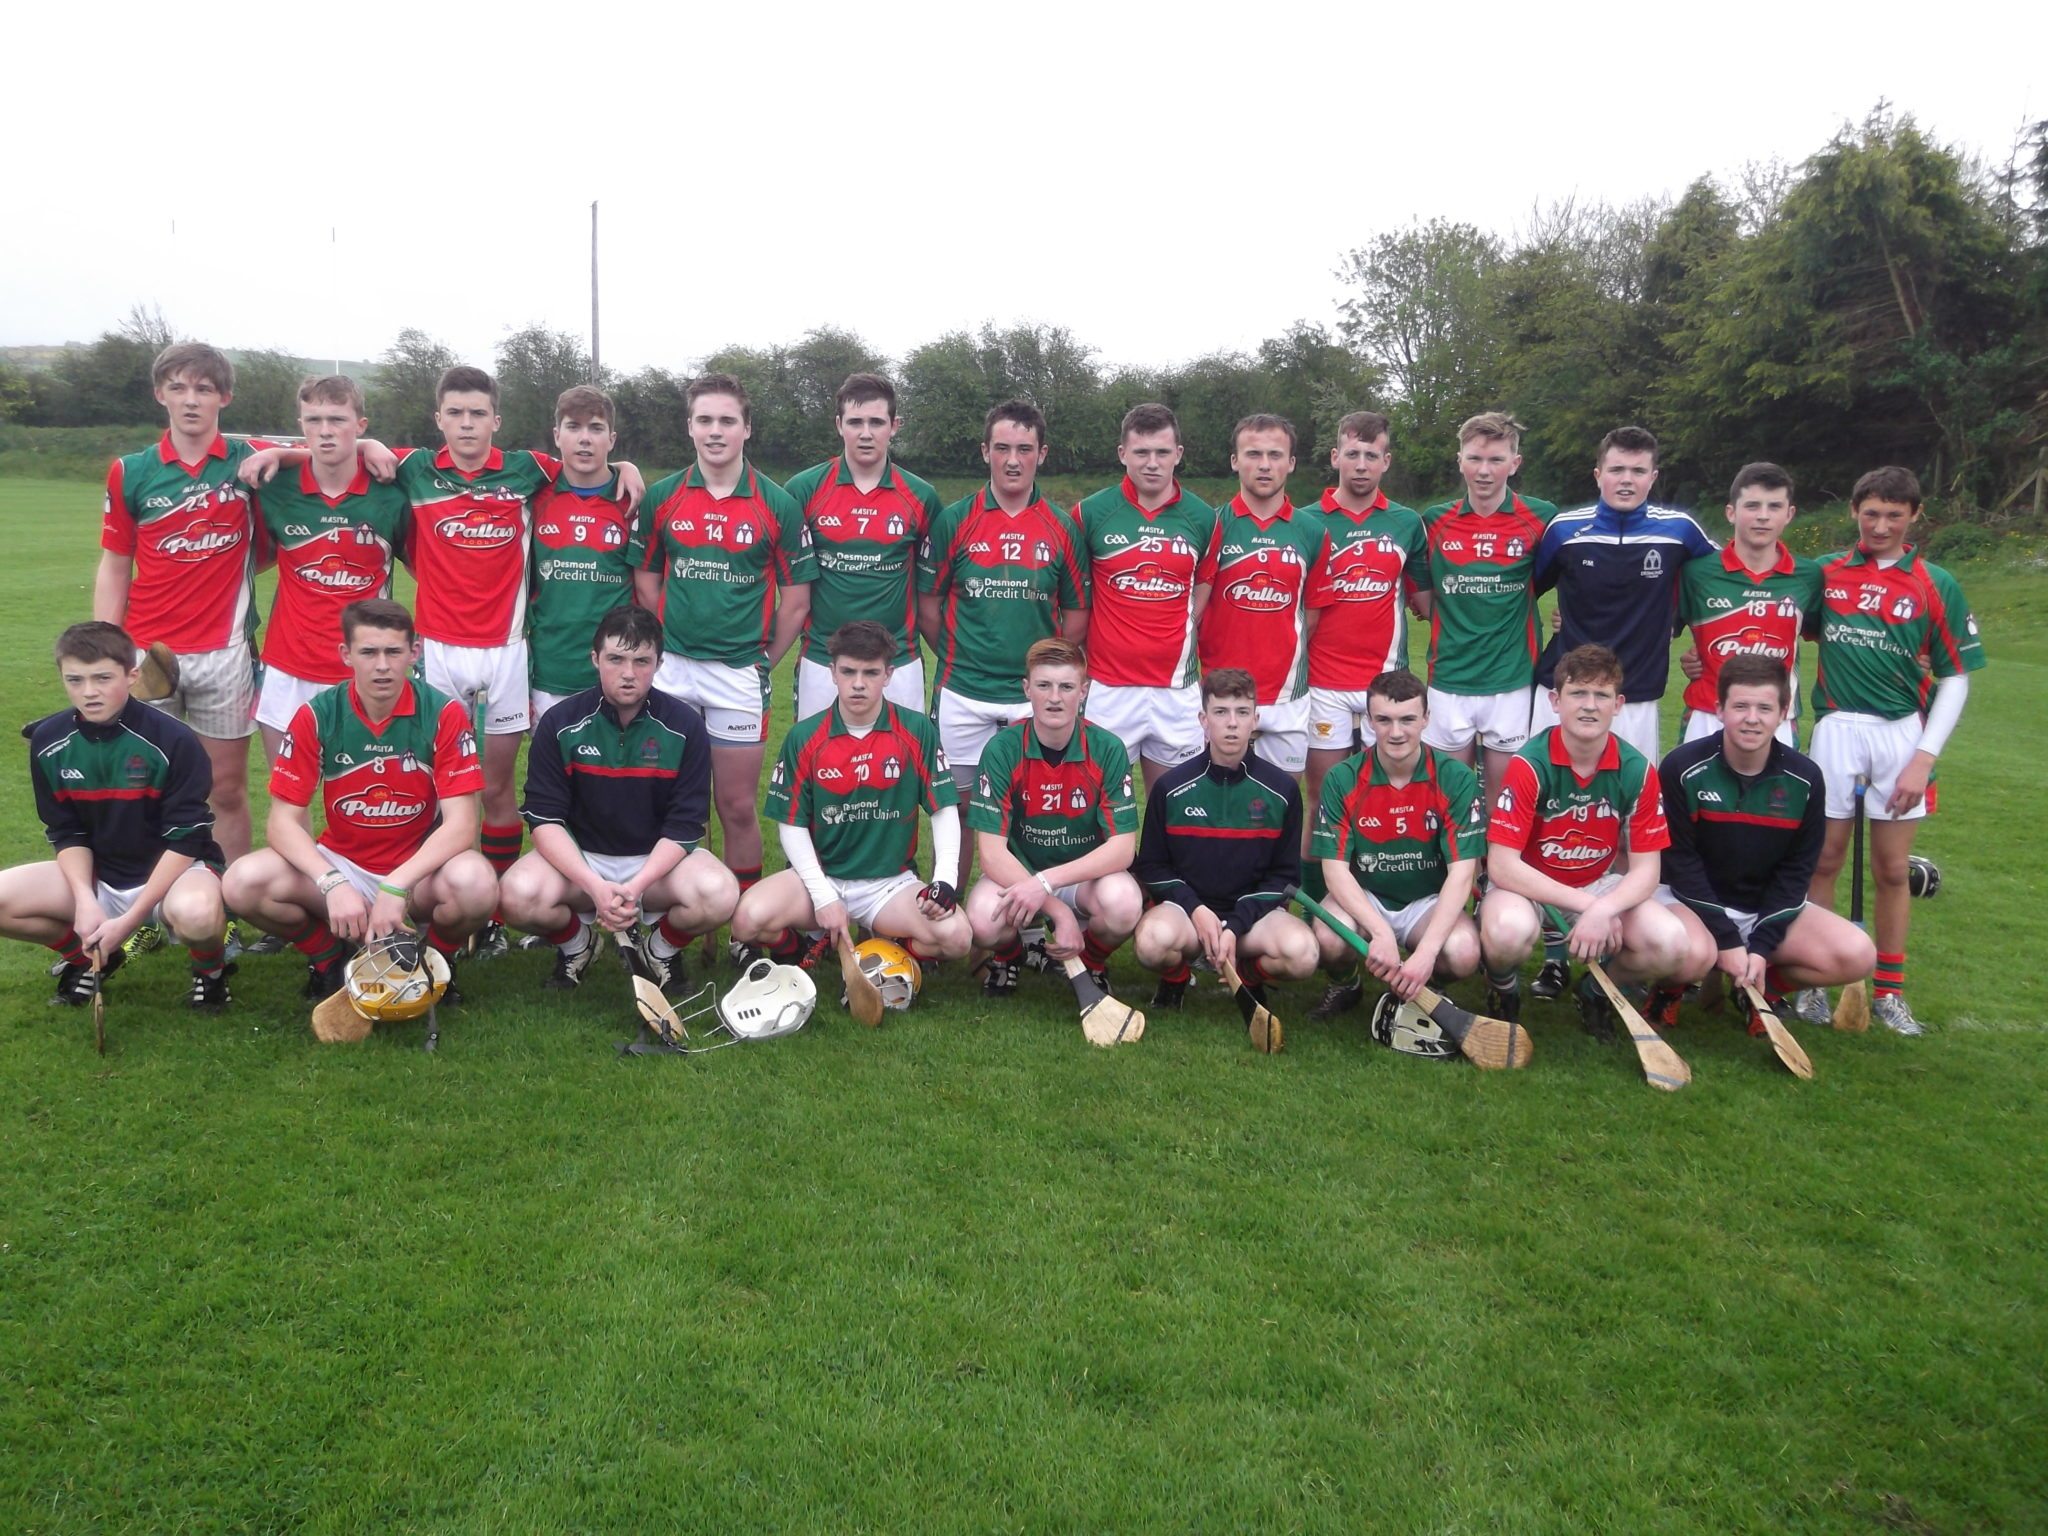 Desmond College Senior hurlers who were narrowly defeated by Hospital in Extra time in Ballingarry on Friday 24th April